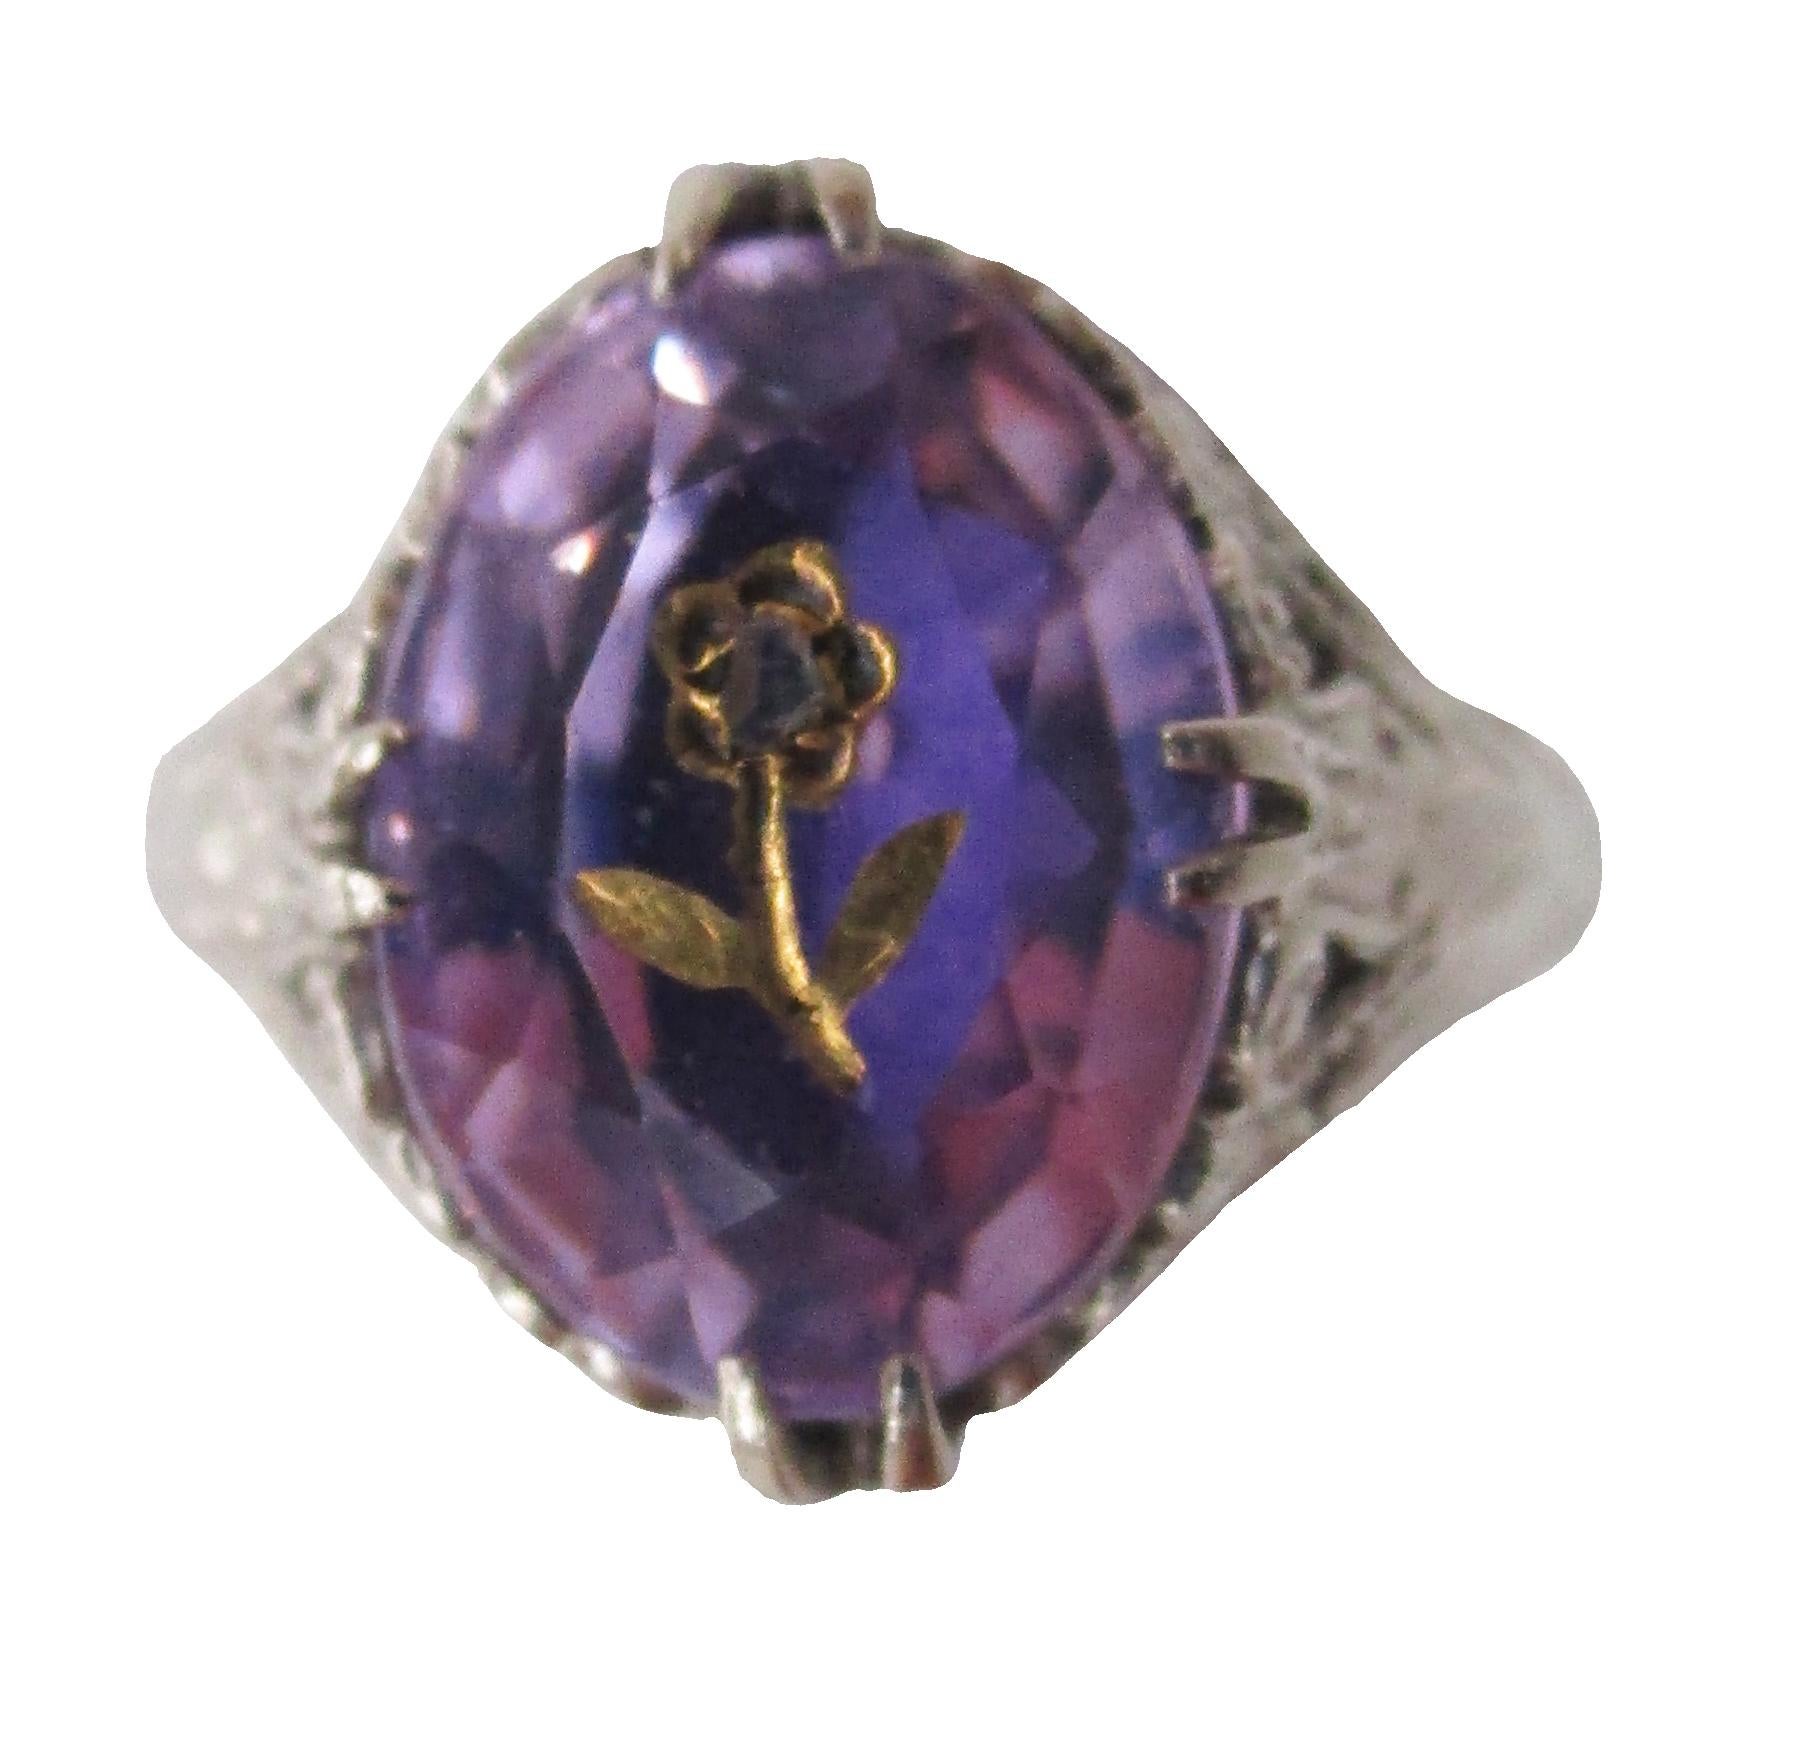 This gorgeous antique ring dates back to the 1920s and incorporates a dramatic pierced filigree shoulder and under-gallery into a stunning ring that boasts a killer Rose de France amethyst center stone accented by a gold diamond accented inlaid